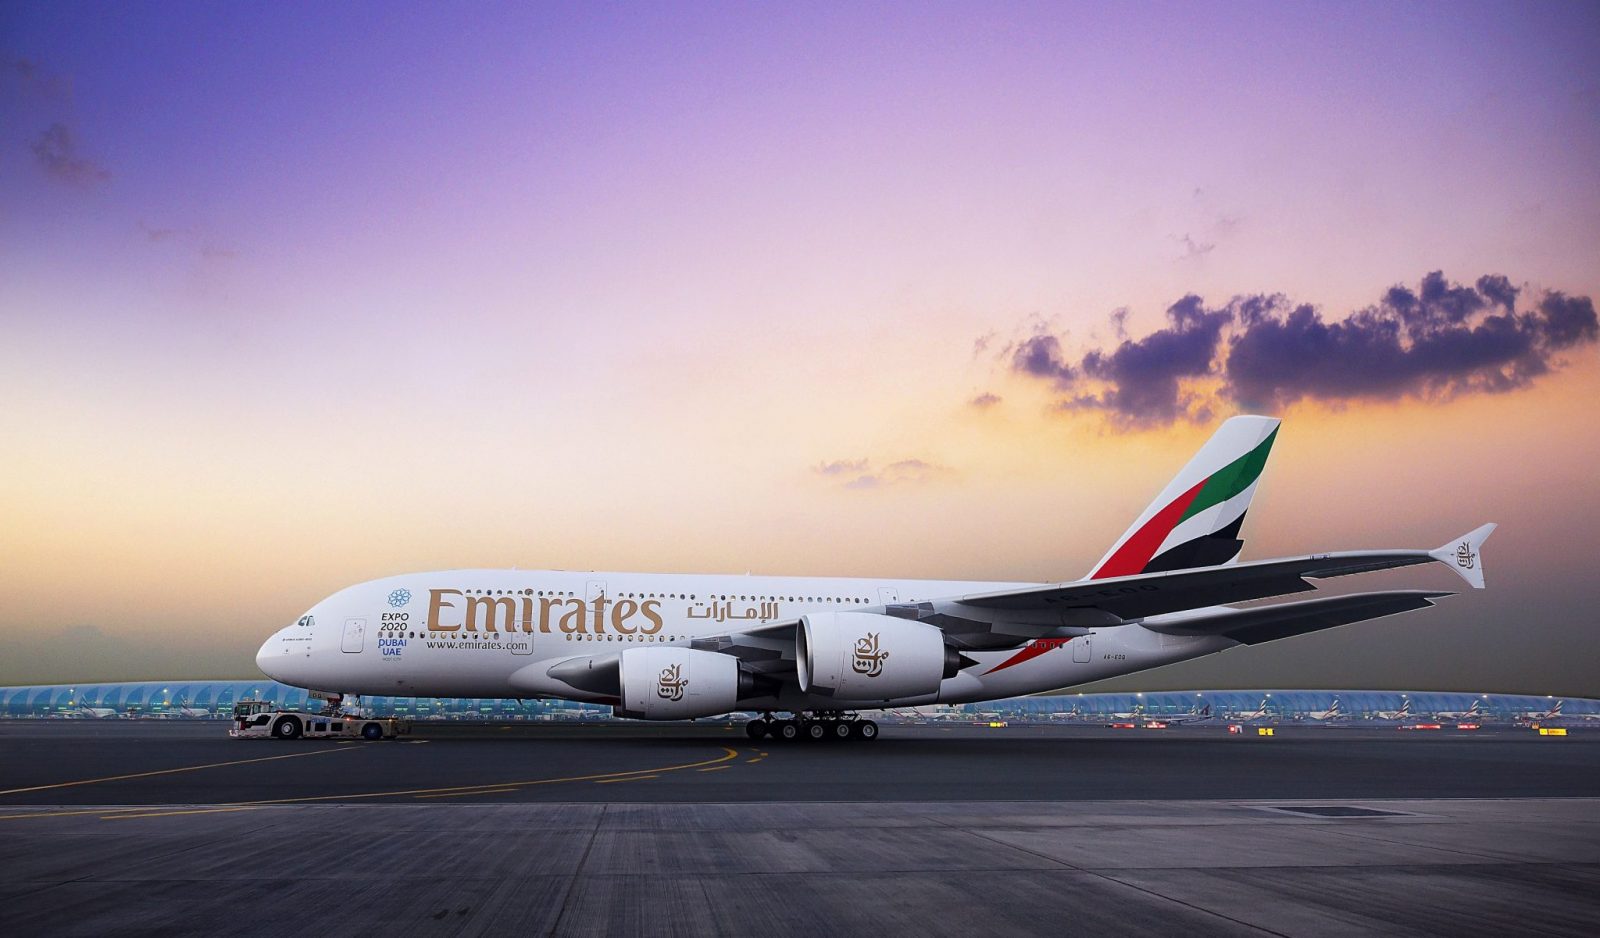 Emirates A3Emirates warns of 'hyper-change' in aviation industry - new cost cutting, charges for customer. cabin crew recruitment suspended80 - New Emirates safety video on Airbus A380 sets to address concerns about passengers taking luggage with them during an evacuation